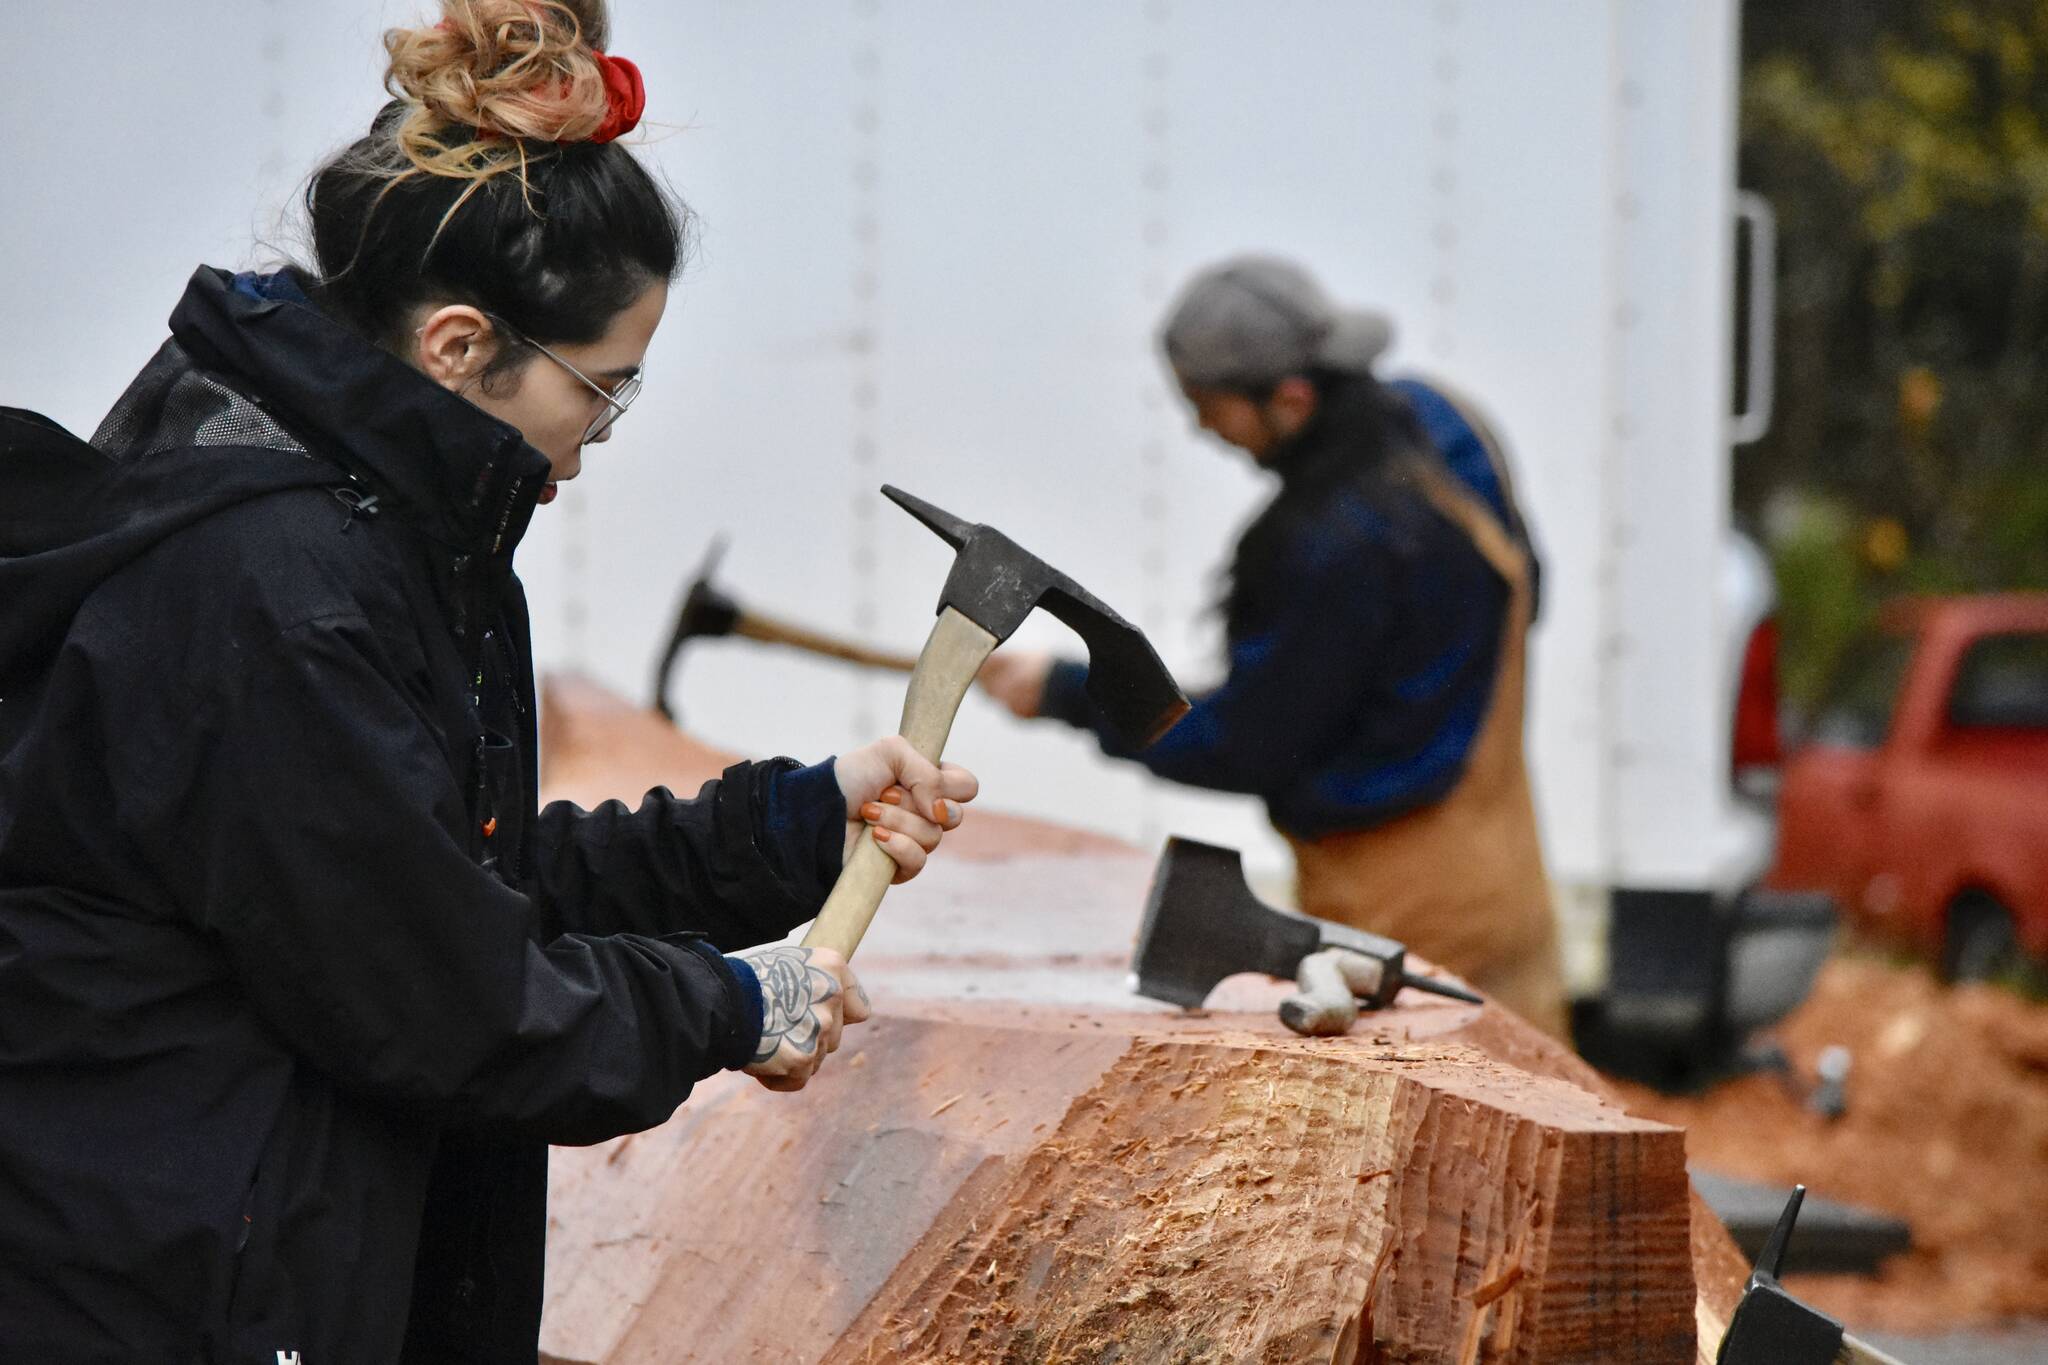 University of Alaska Student Skaydu.û Jules, carves a red cedar log under the supervision of Tlingit master carver Wayne Price in the parking lot of Angoon High School on Tuesday. Jules, a member of the Teslin Tlingit Council, a self-governing First Nation based in Teslin in Southern Yukon Territory, Canada, and said she wants to become a Tlingit language teacher.